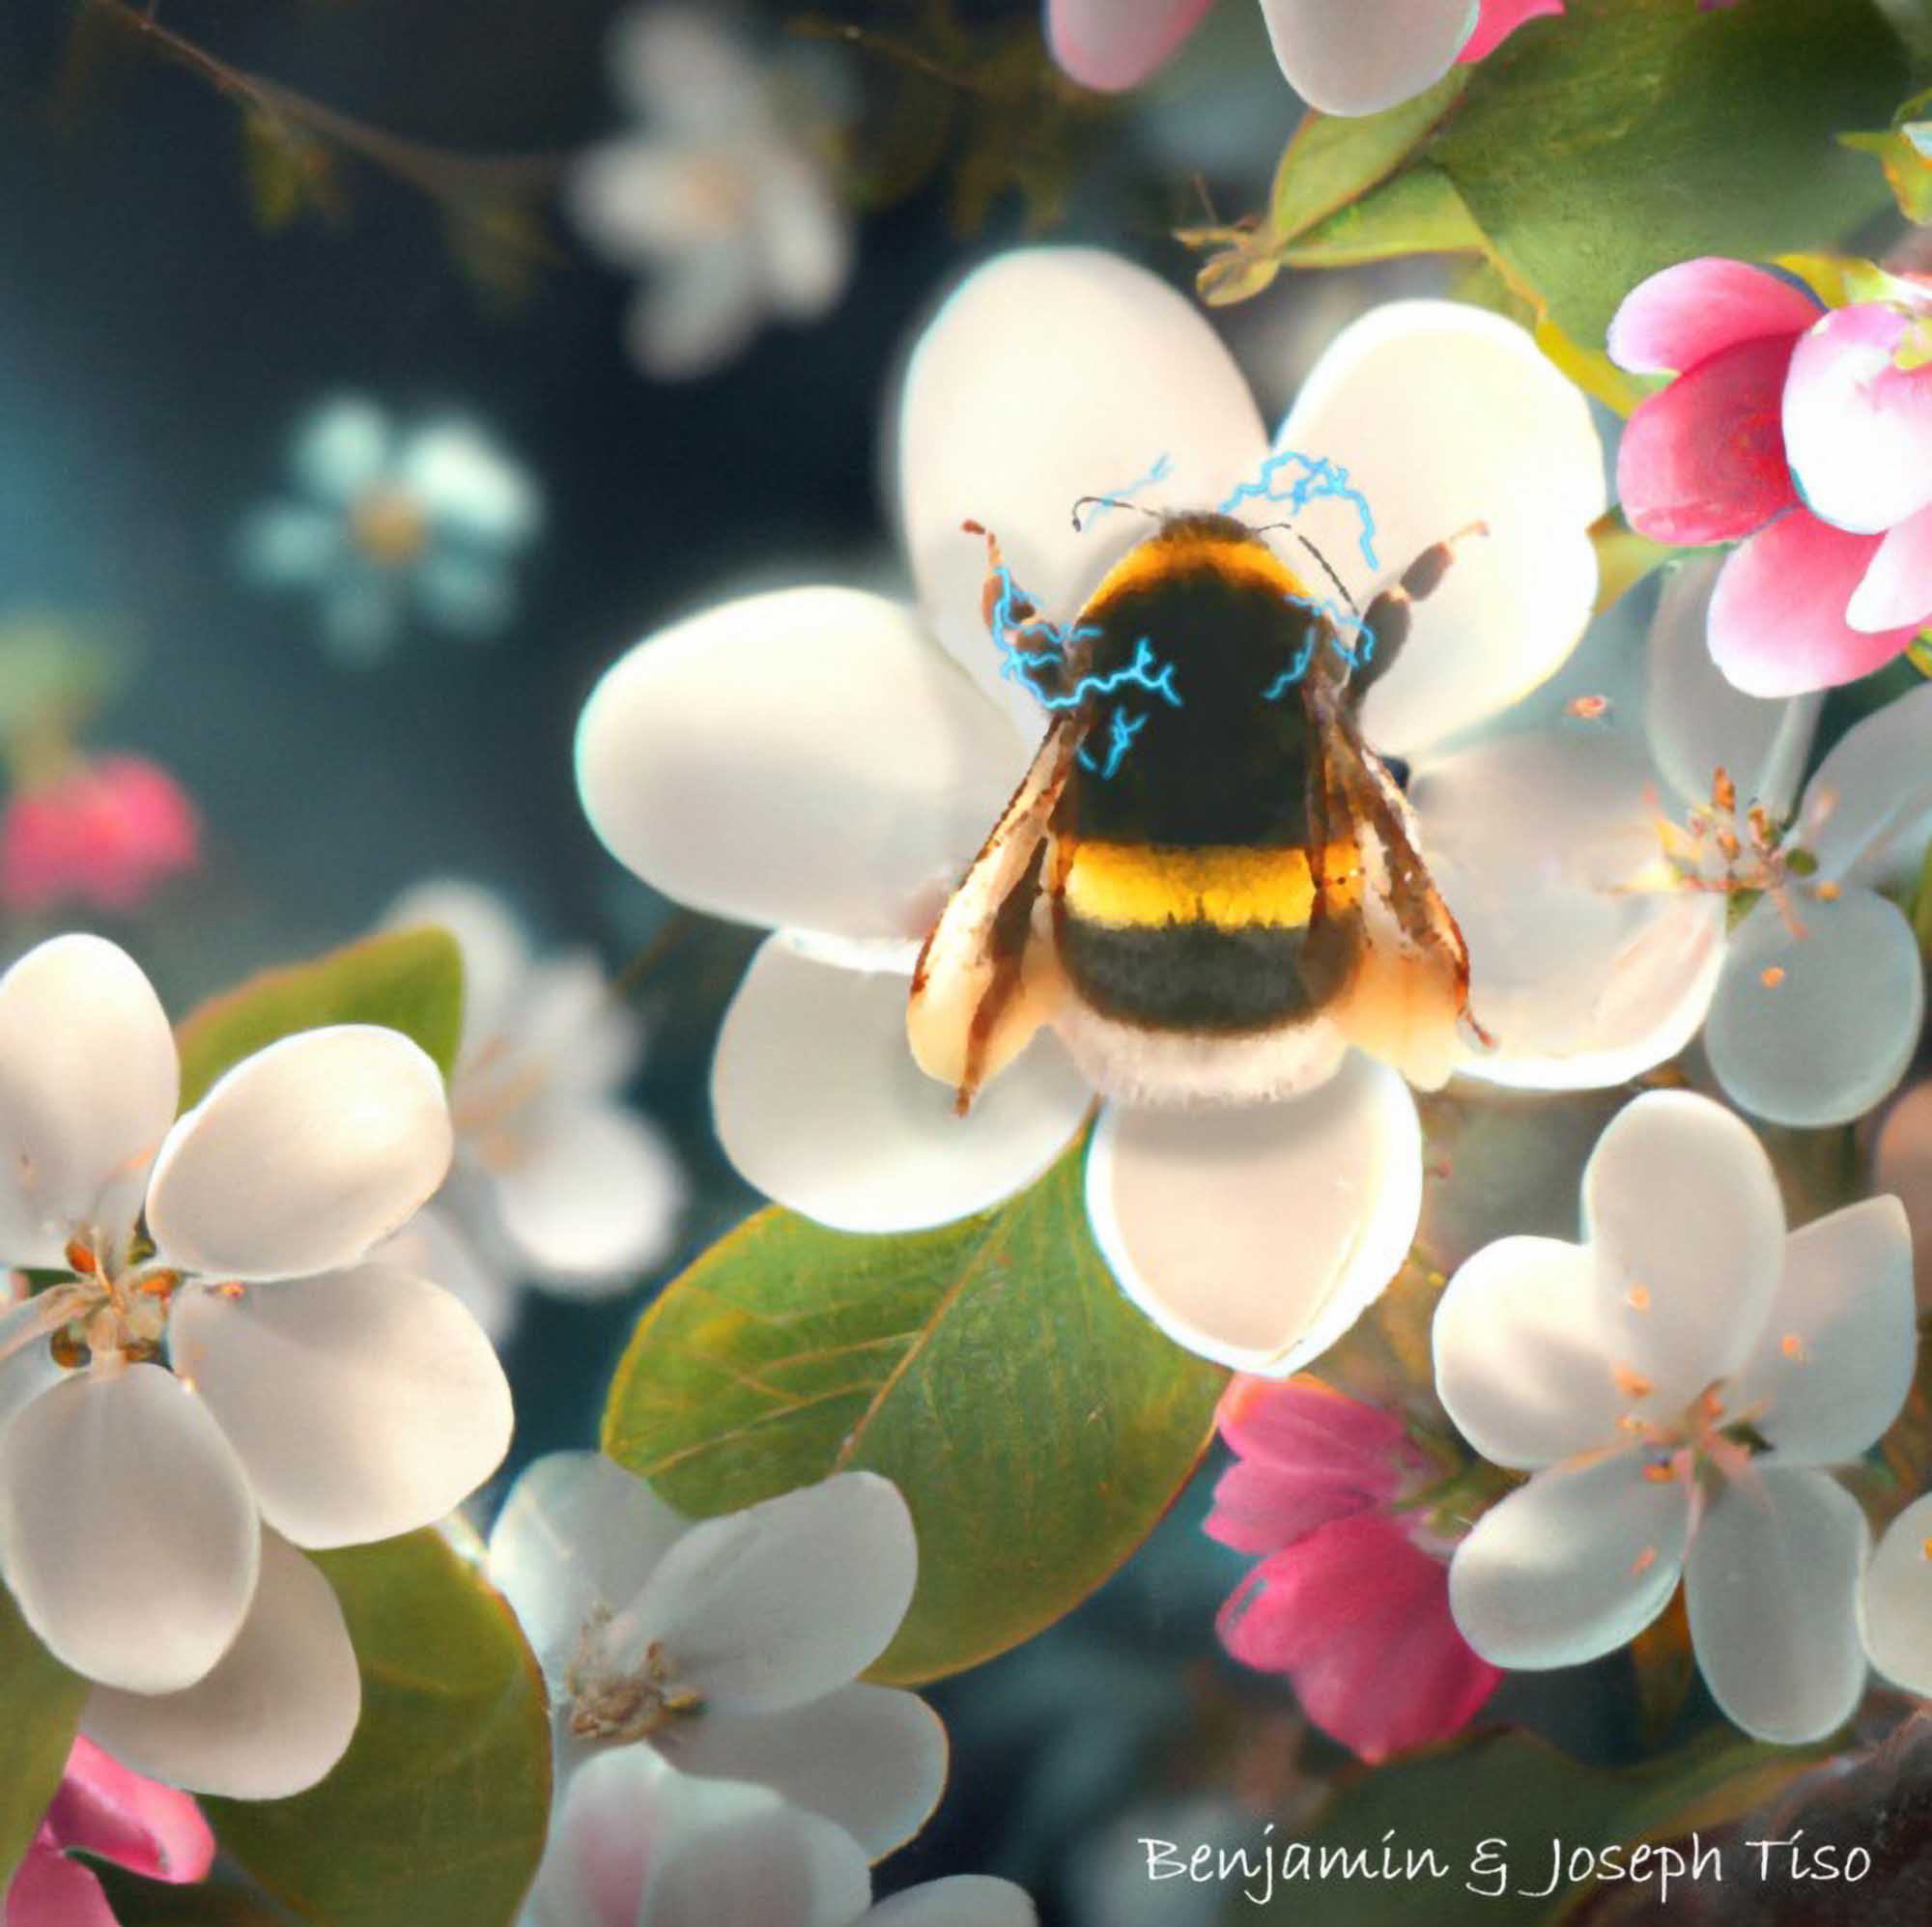 Pesticides Reduce Pollination As Bees Sense Electric…